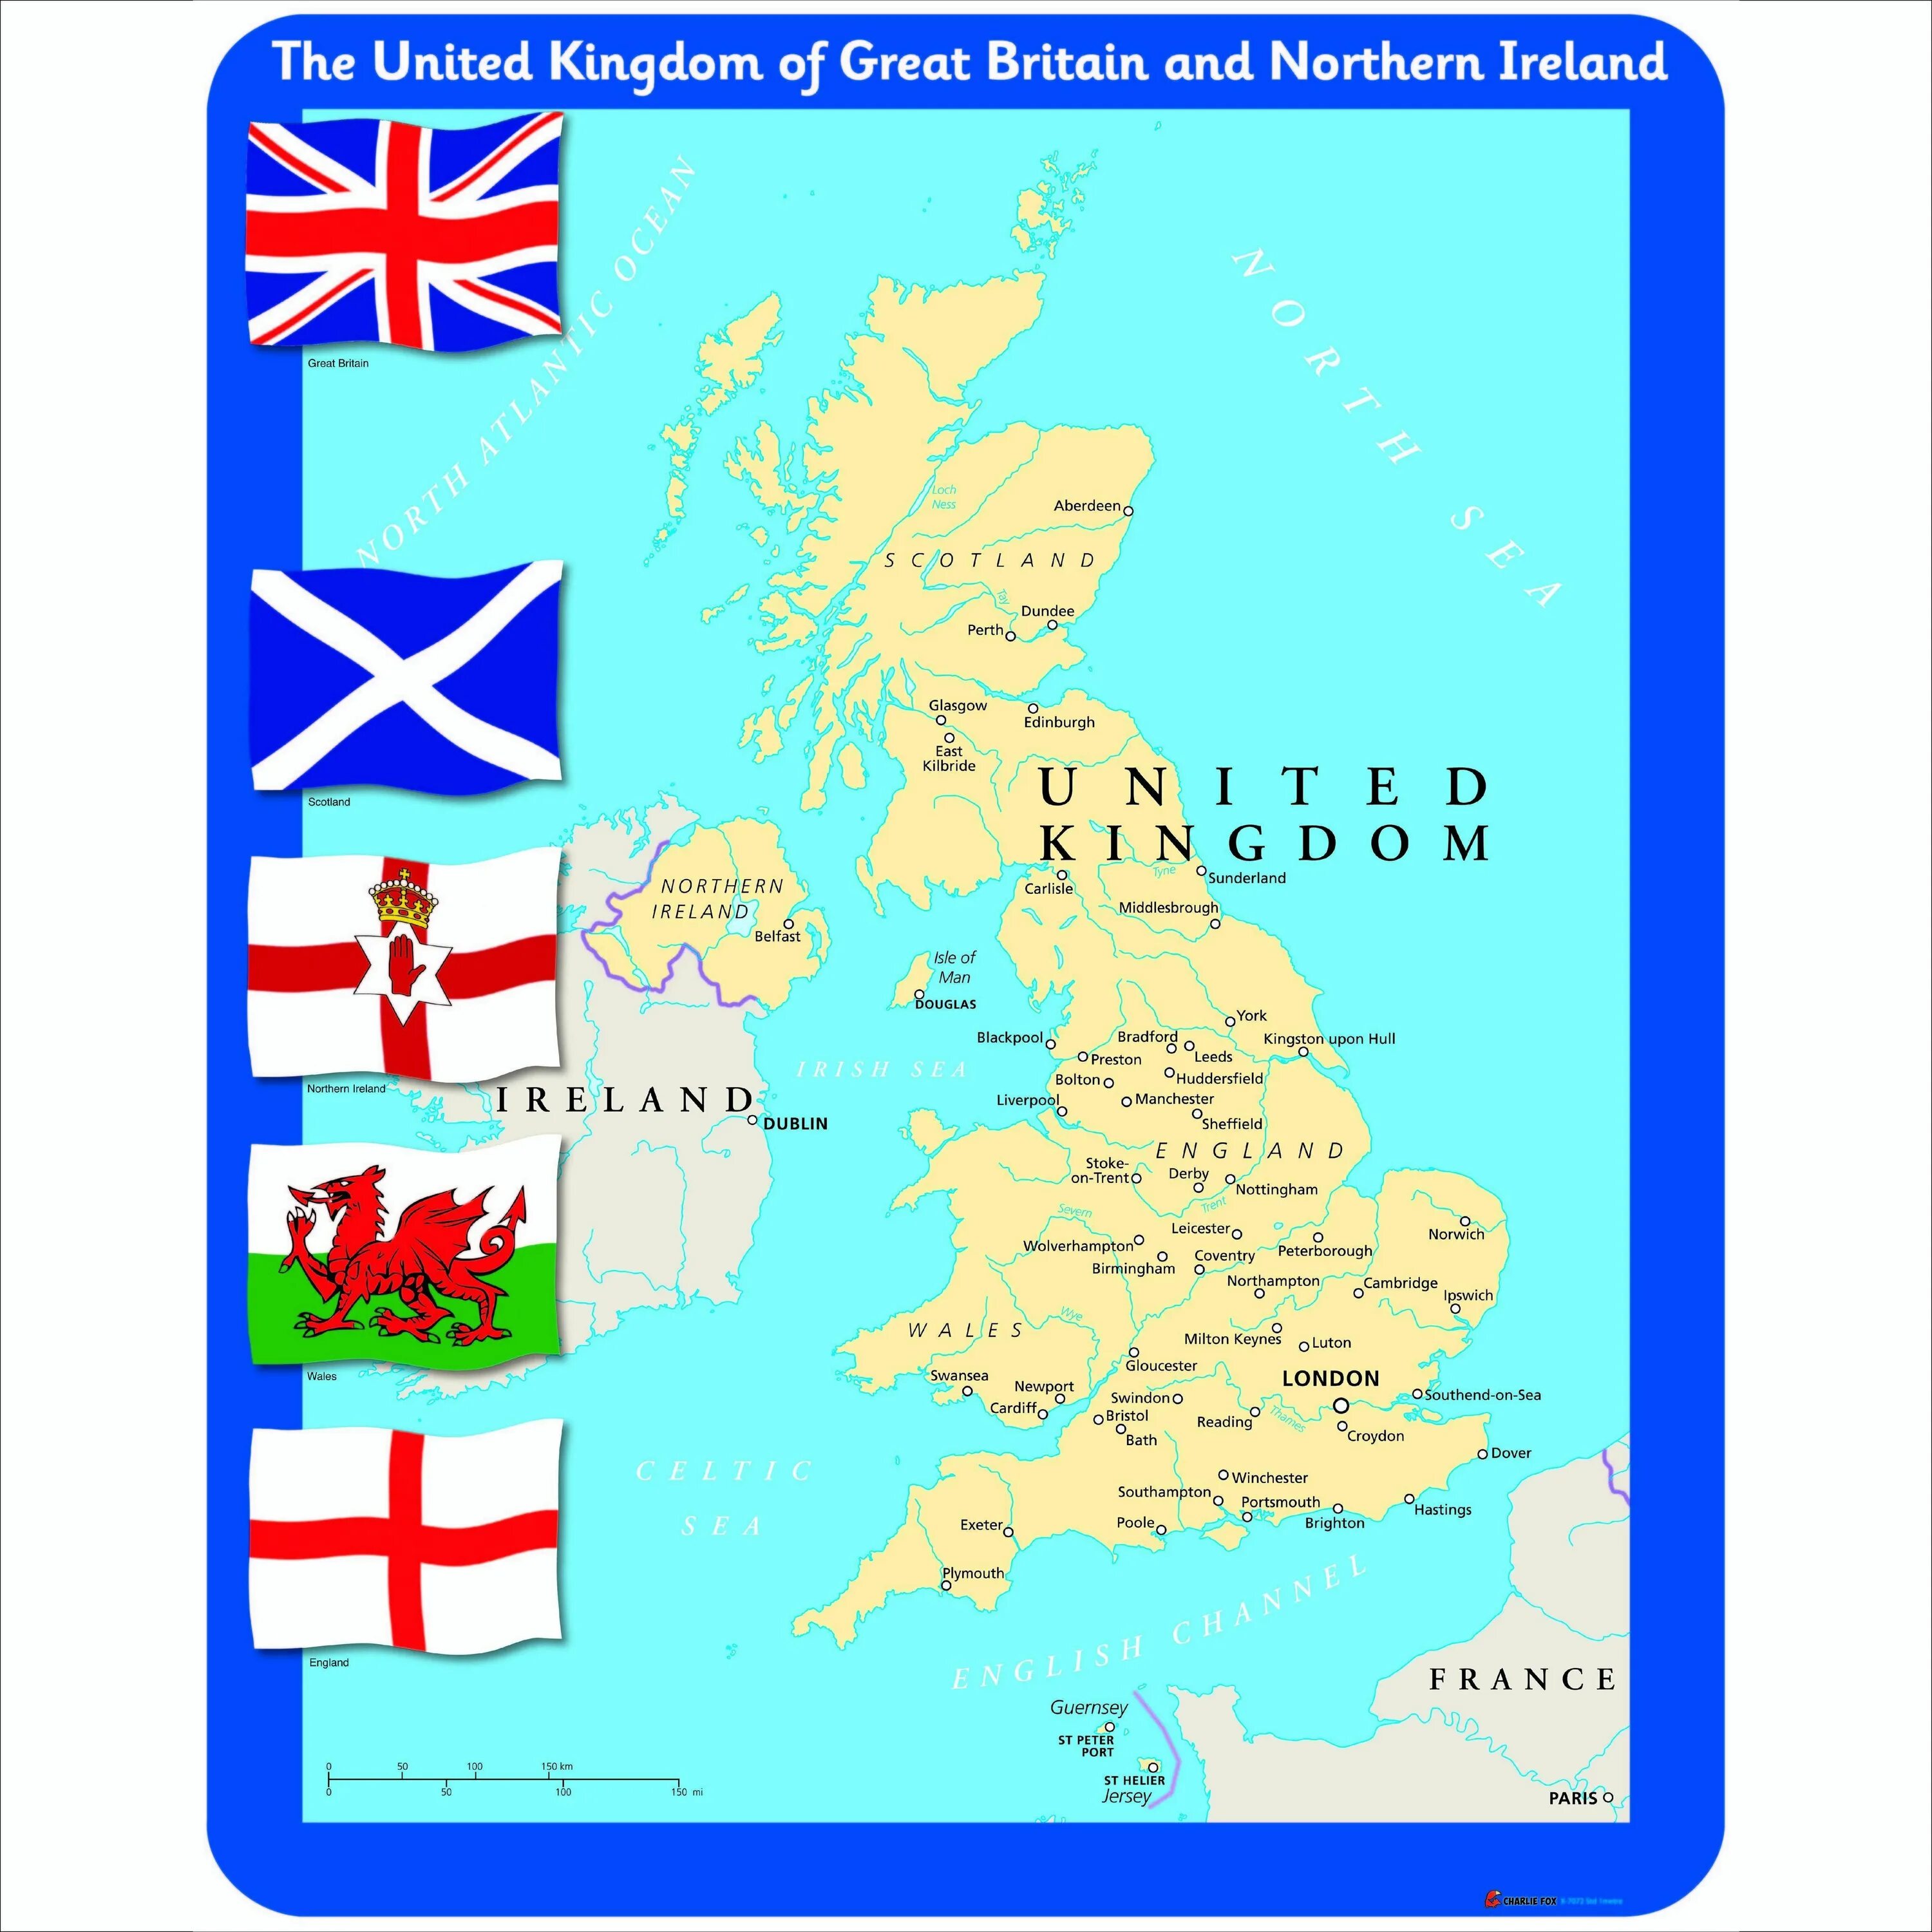 Great Britain карта. The United Kingdom of great Britain and Northern Ireland on the Map. The United Kingdom of great Britain and Northern Ireland карта. Карта uk of great Britain.